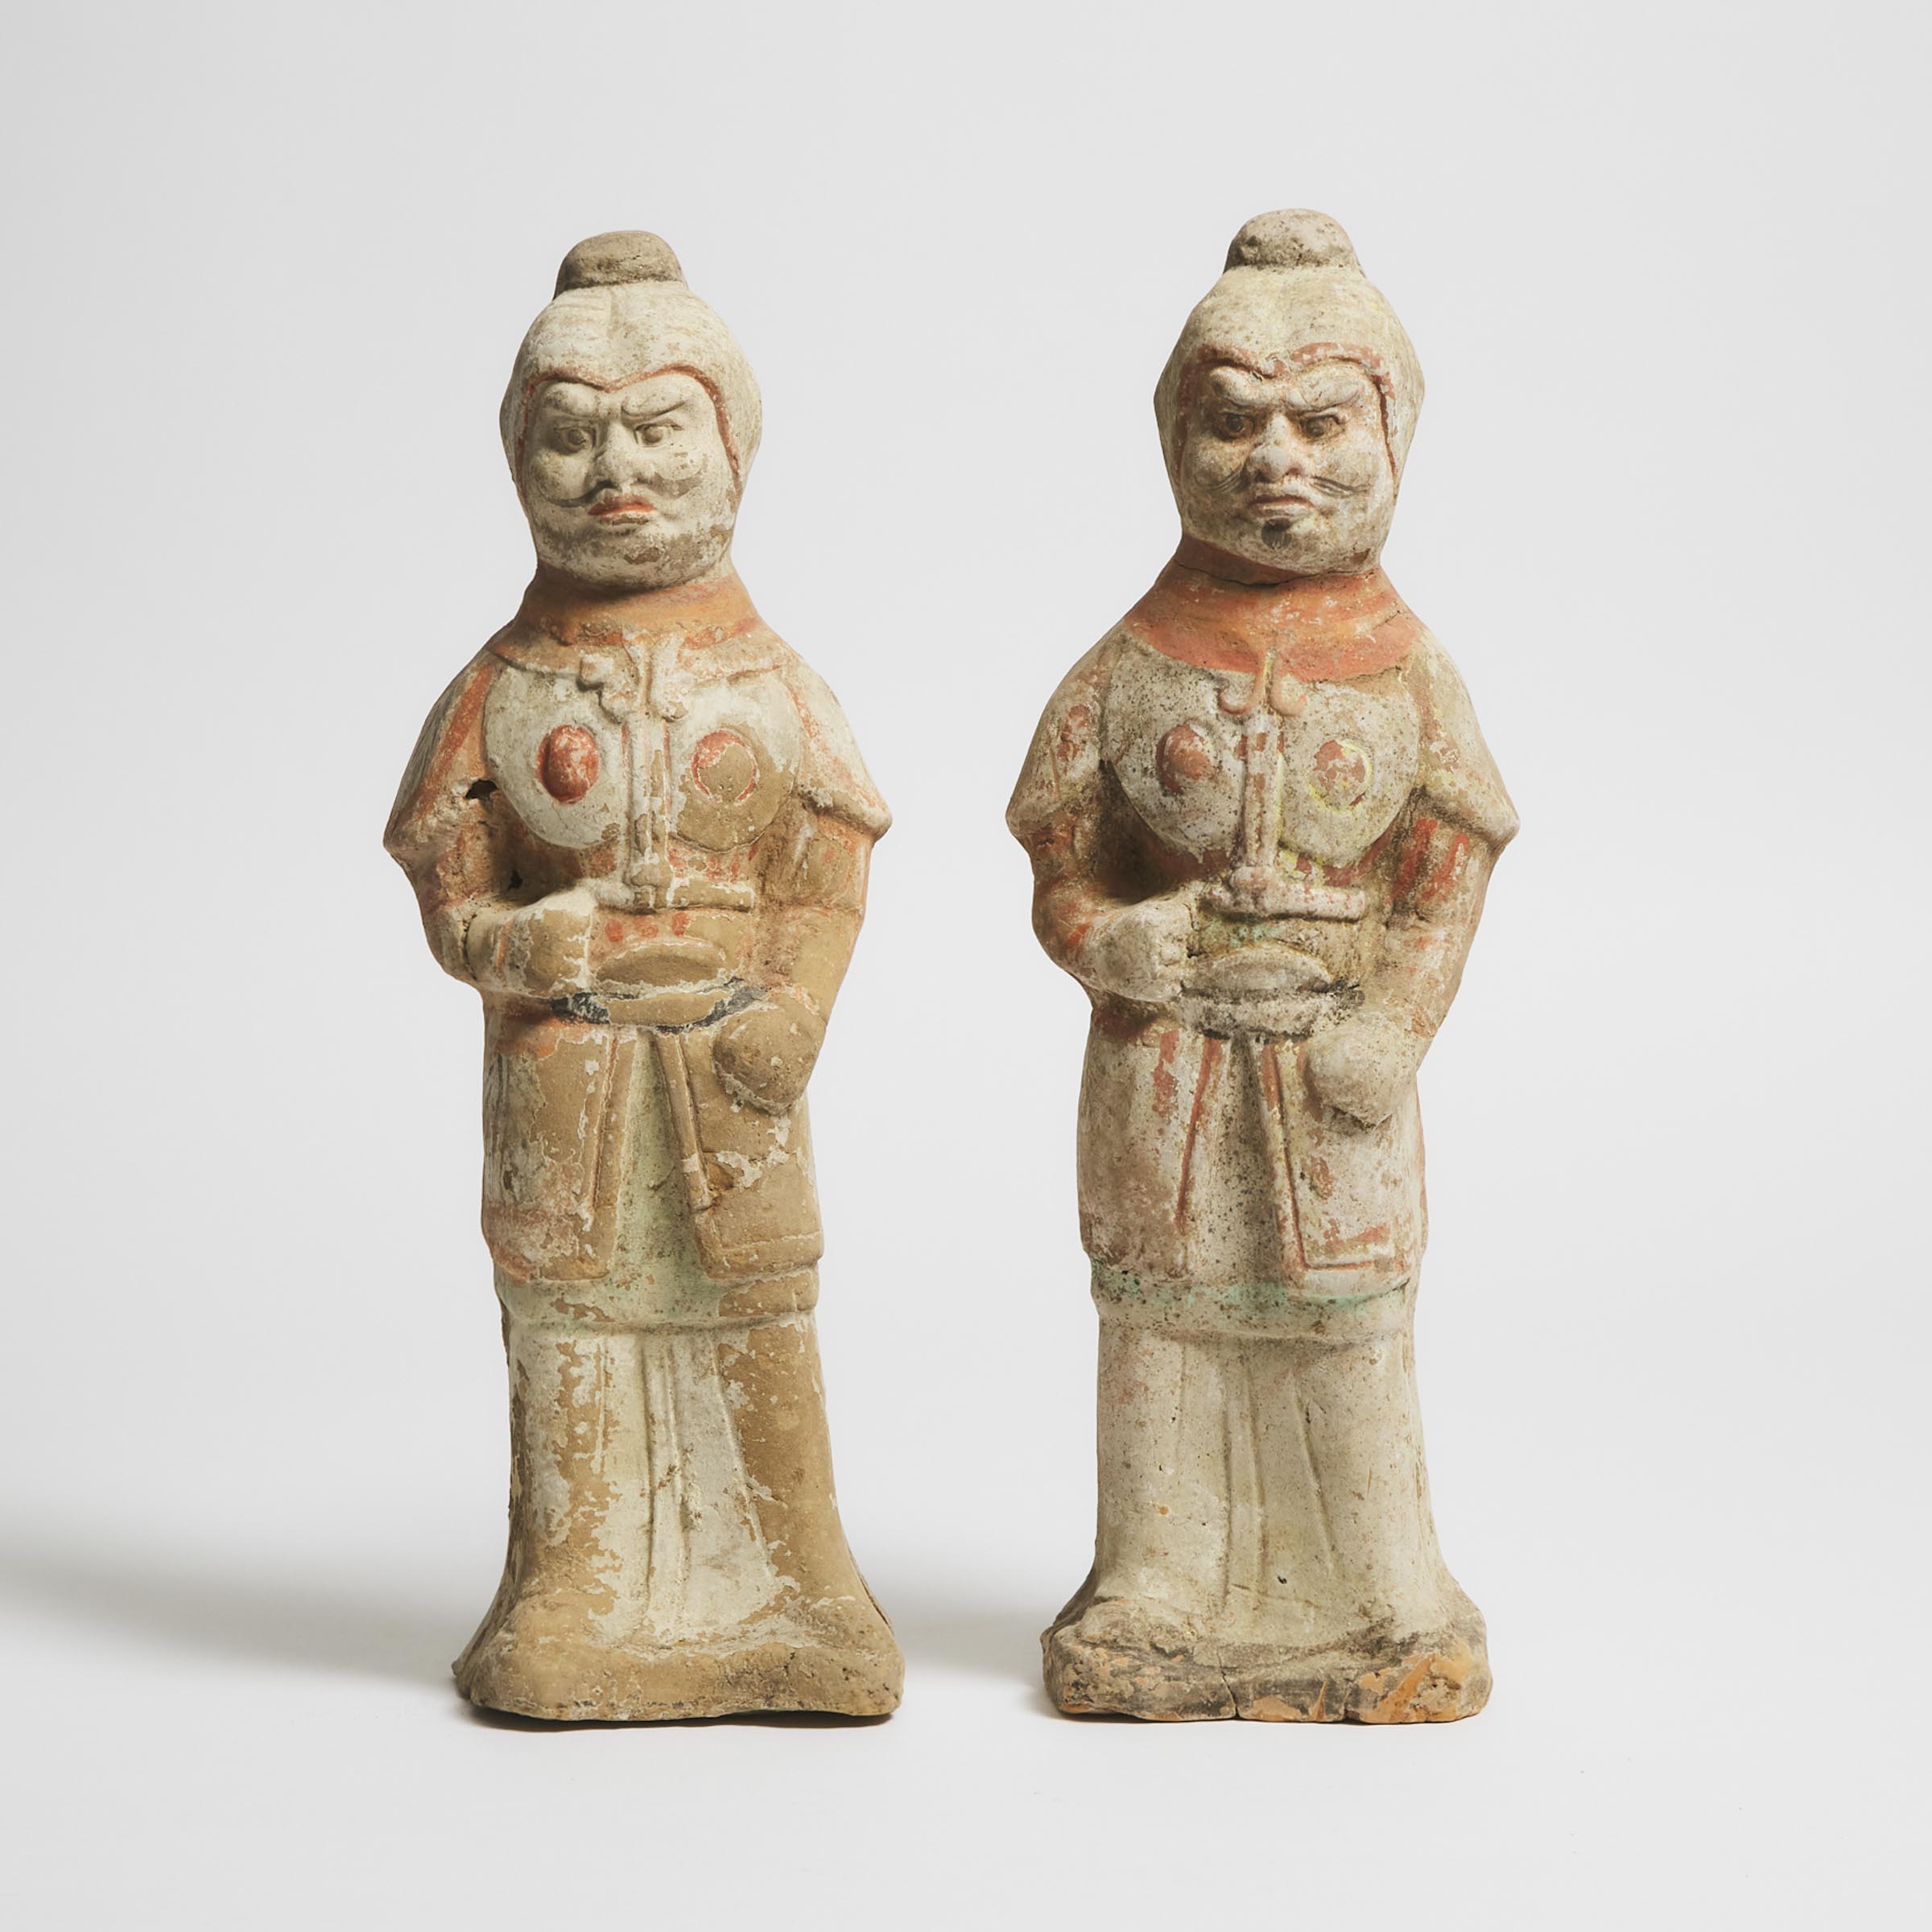 A Pair of Painted Pottery Lokapala Guardians,